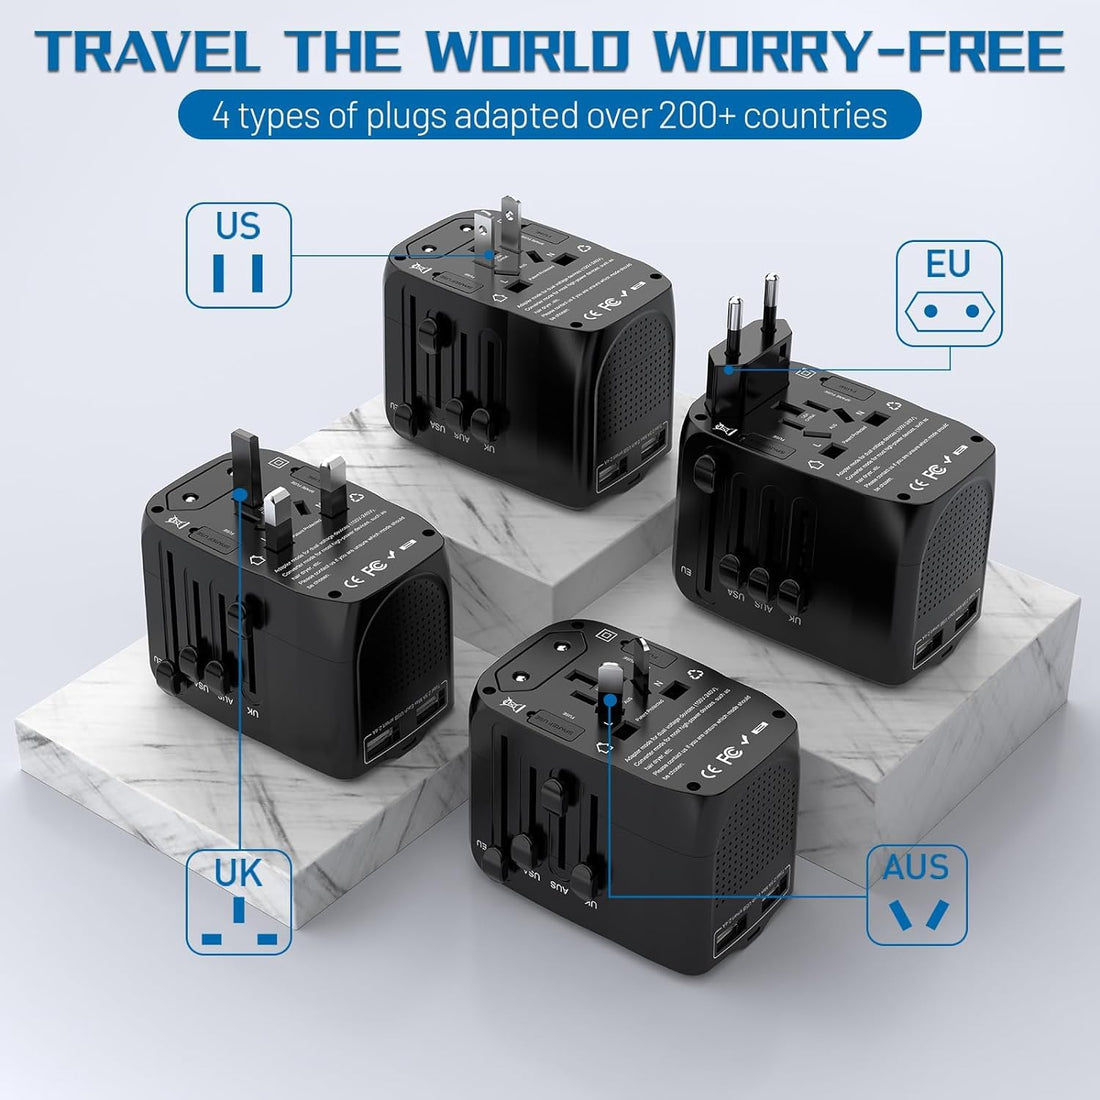 APzek 220V to 110V Converter Travel Adapter Combo with 2 USB, International Voltage Converter for Hair Dryer Phone Laptop, All-in-one Power Converter for US to UK EU AU Asia Over 200+Countries